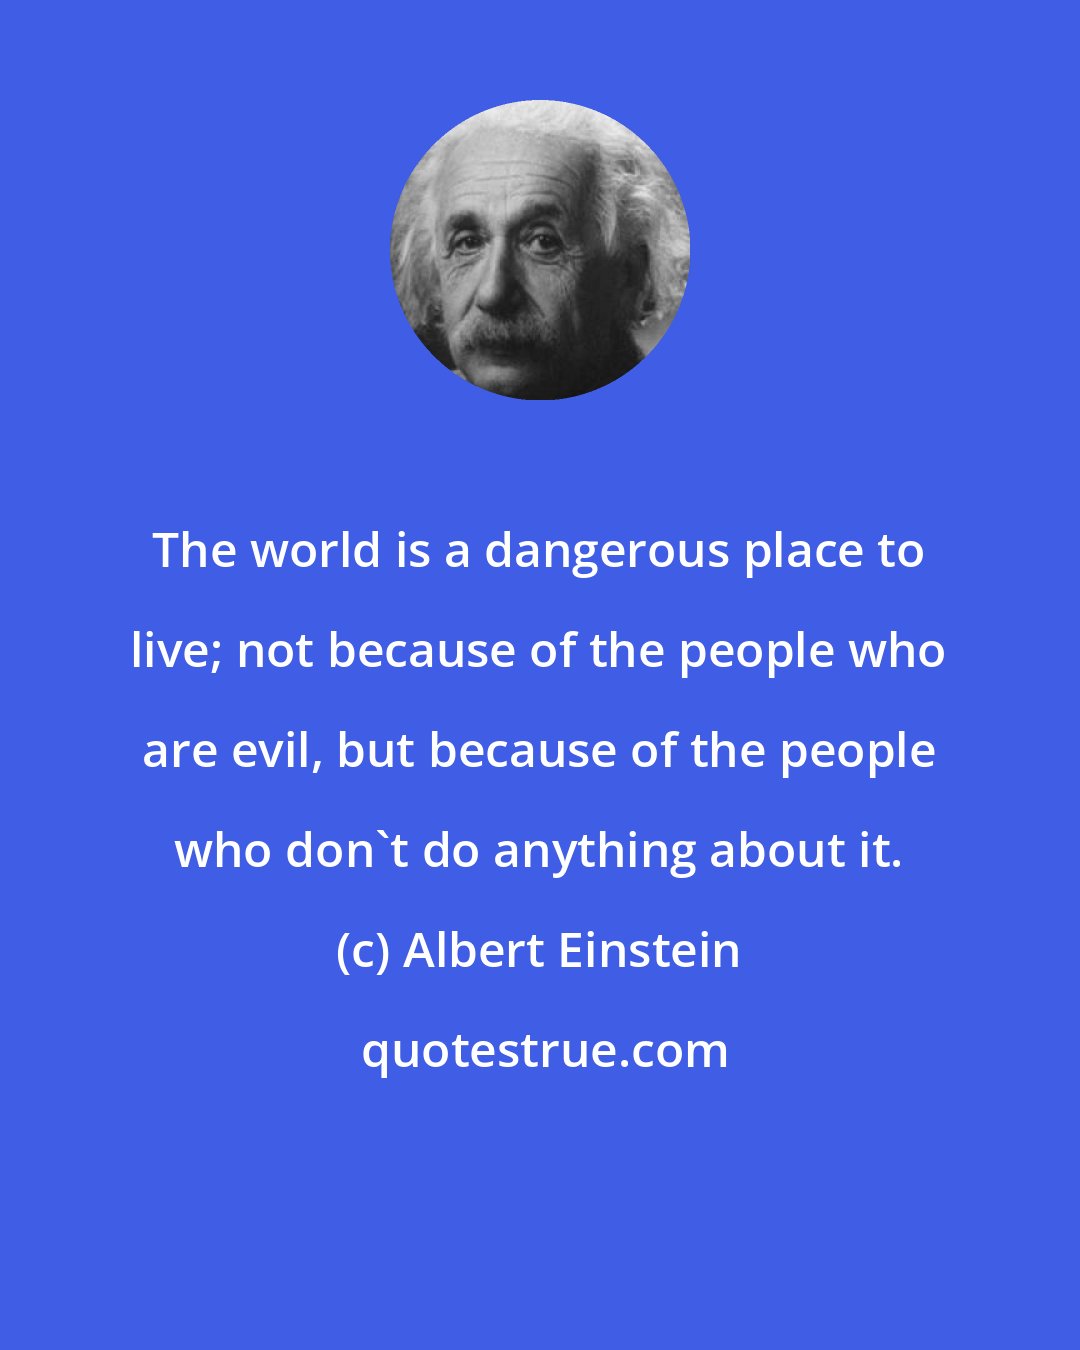 Albert Einstein: The world is a dangerous place to live; not because of the people who are evil, but because of the people who don't do anything about it.